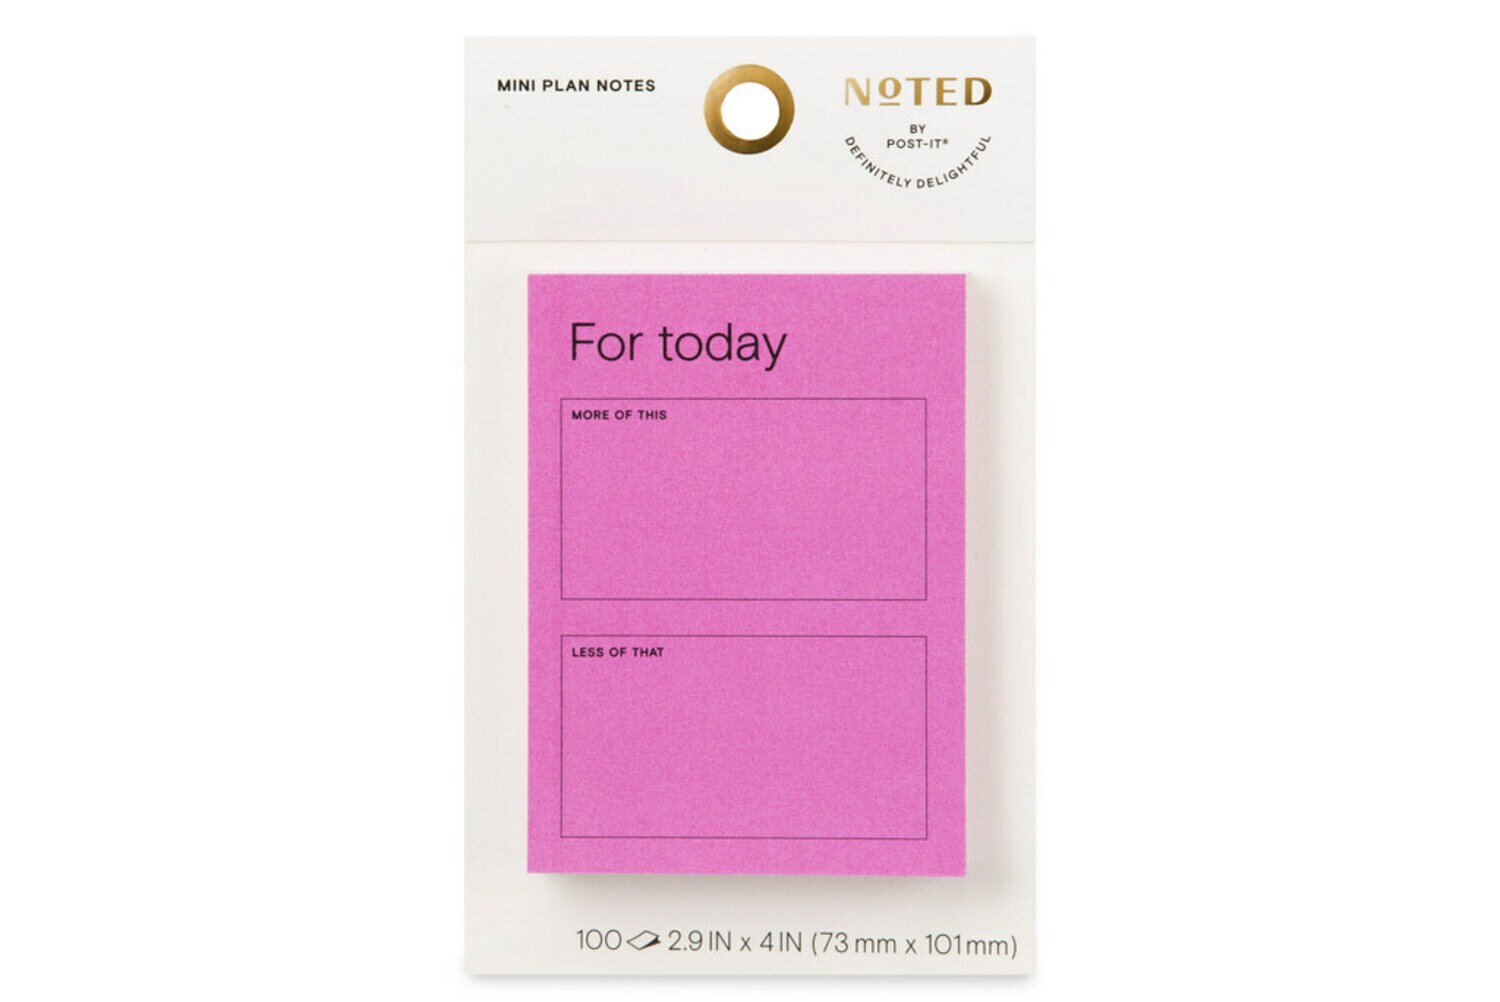 Post-it 653-24APVAD Notes Value Pack for sale online